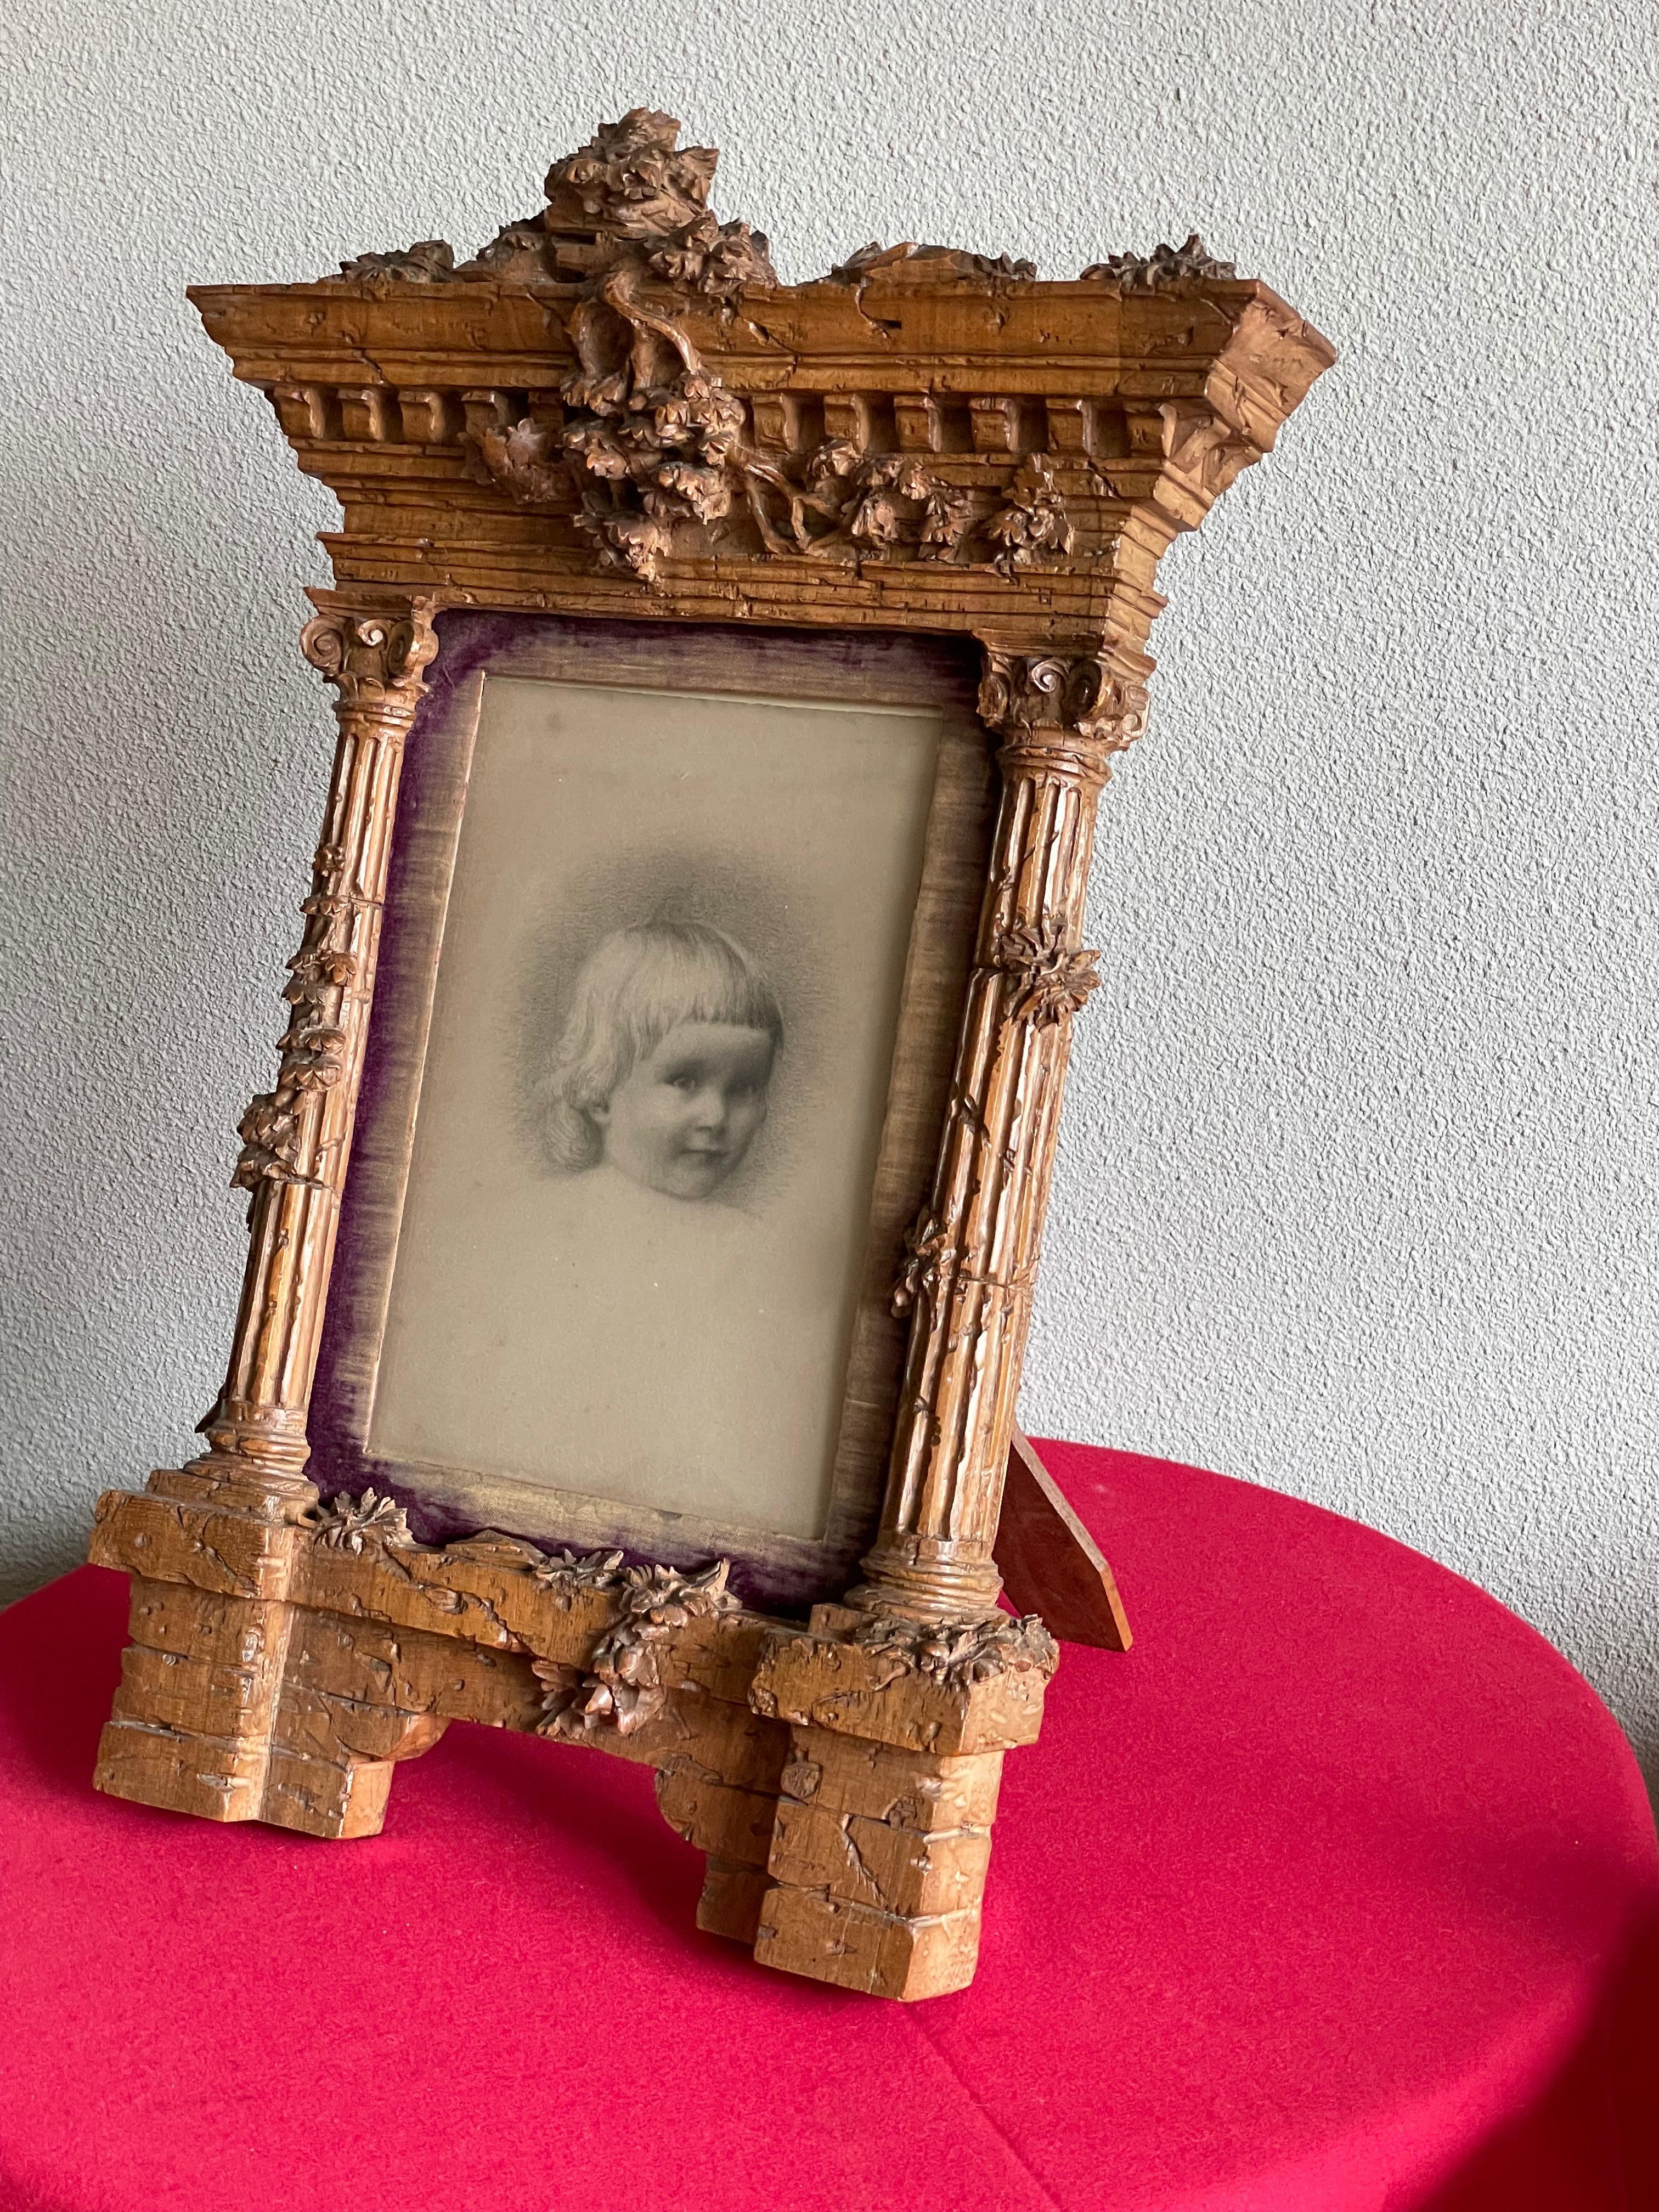 Amazingly hand-carved photo or picture frame with a top quality, original drawing of a girl.

If ever there was an antique work of art 'with a soul' then this unique and all original, 'grand tour relic' would be it. Both the hand carved temple